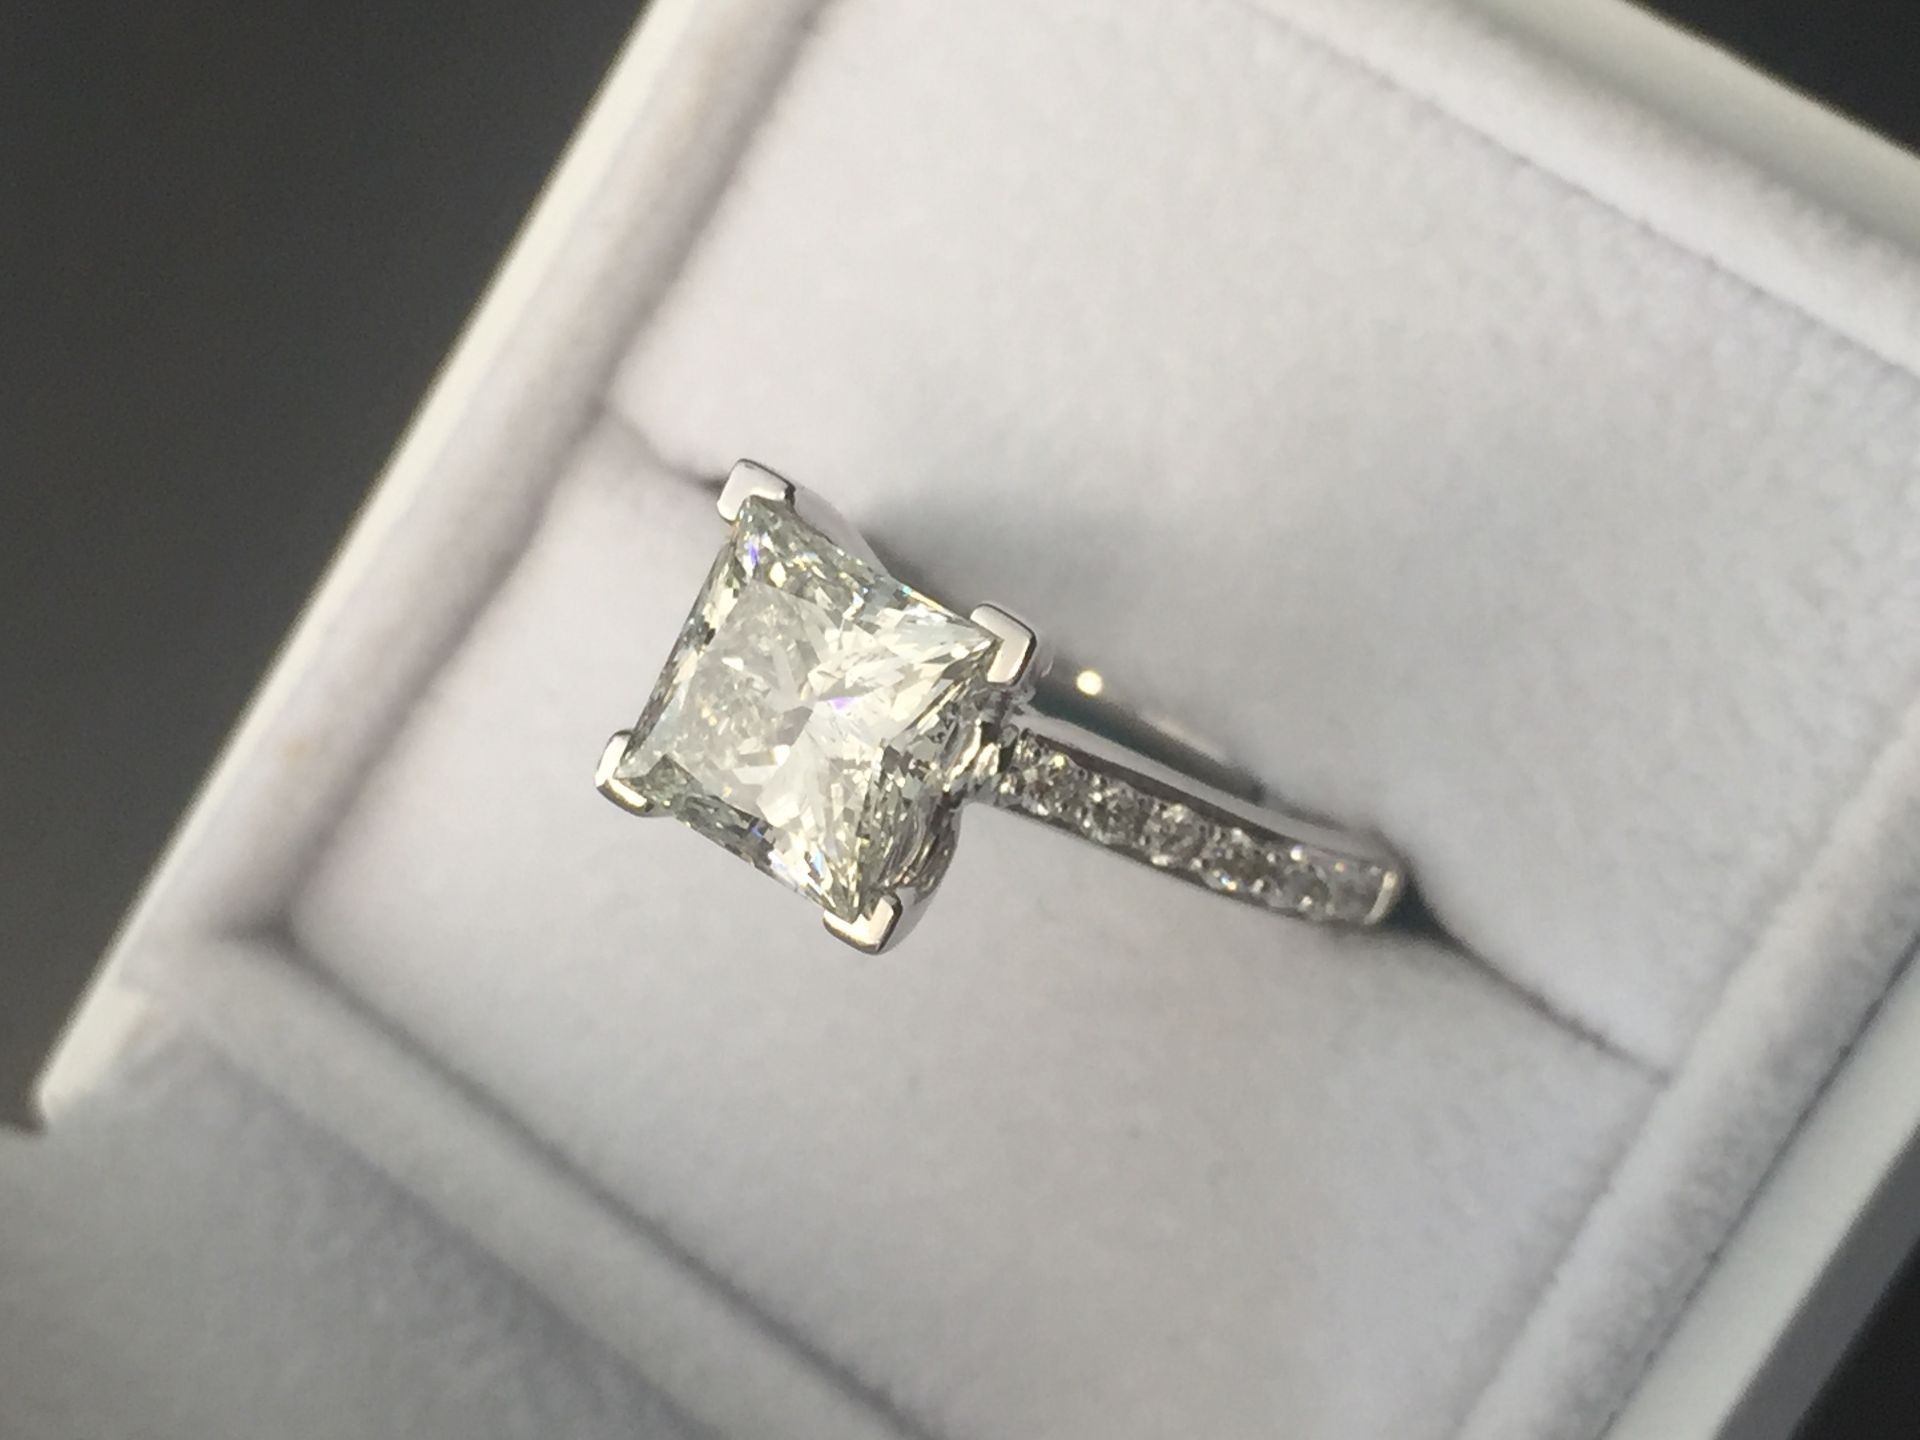 2.09ct diamond set solitaire ring with a princess cut diamond, H colour and si2 clarity on an EGL - Image 2 of 3